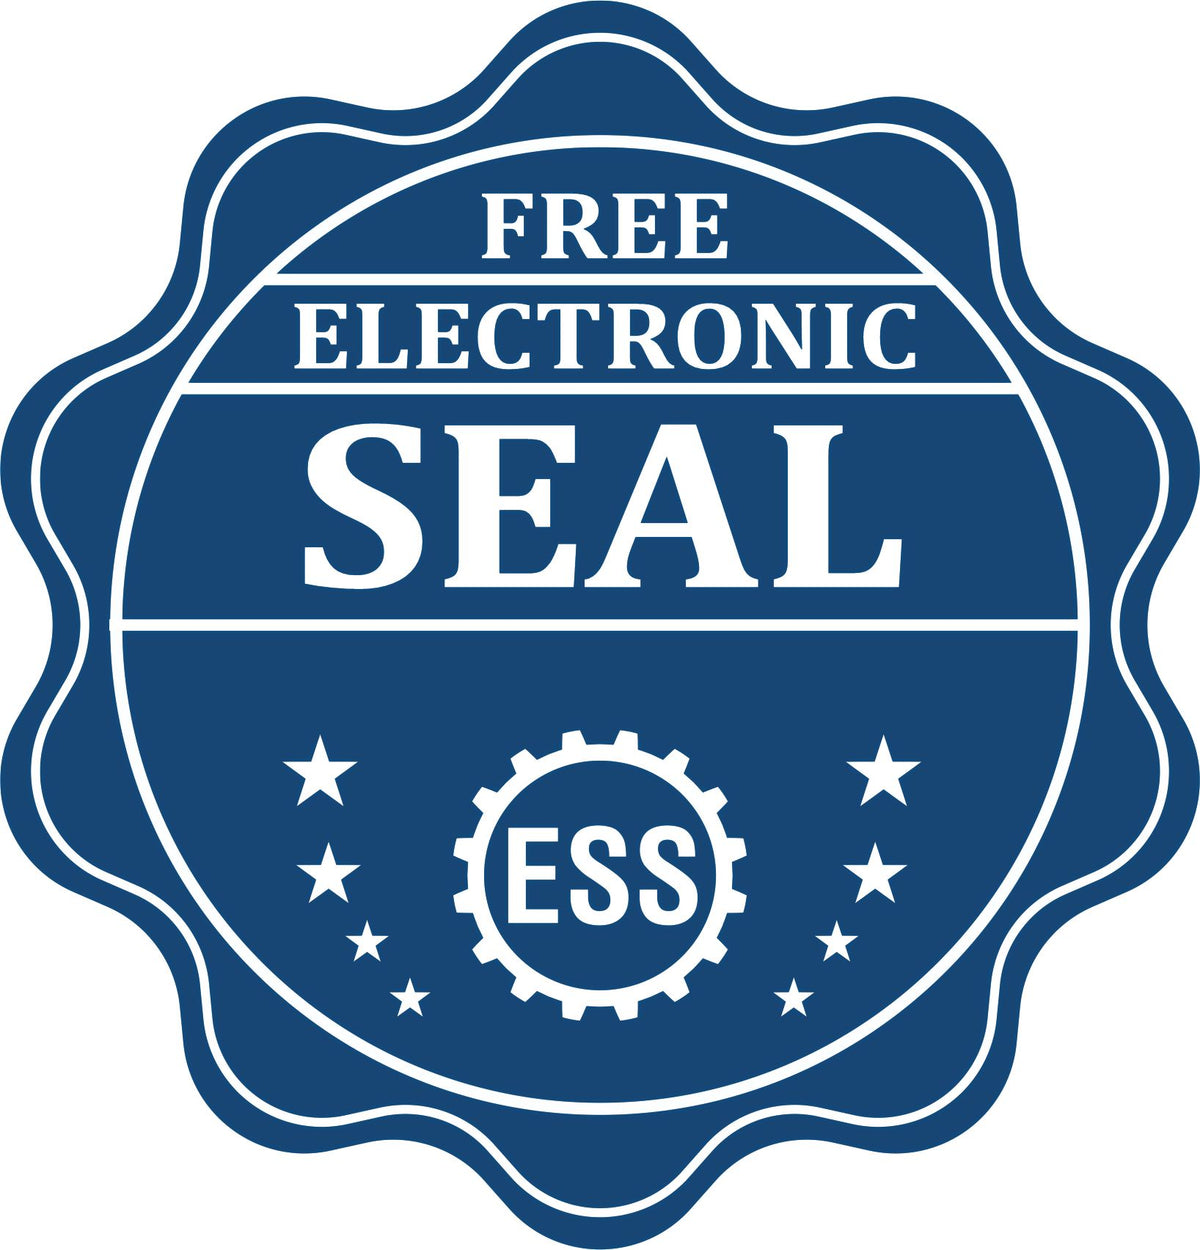 A badge showing a free electronic seal for the Long Reach Maryland PE Seal with stars and the ESS gear on the emblem.